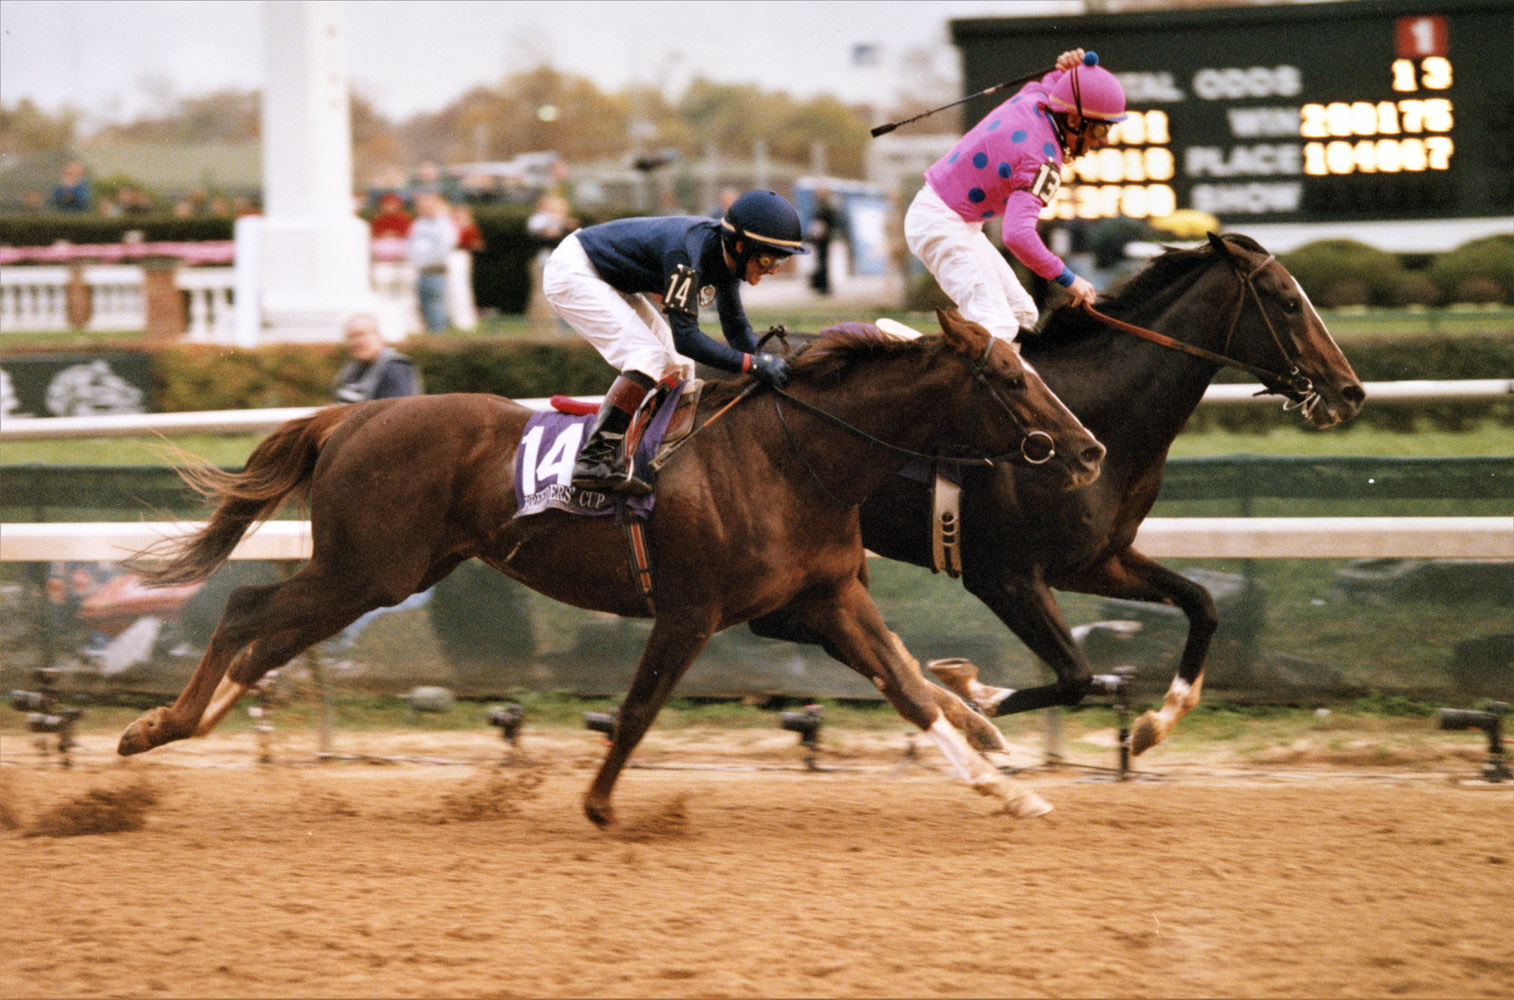 Tiznow (Chris McCarron up) winning the 2000 Breeders' Cup Classic at Churchill Downs by a neck over Giant's Causeway (Keeneland Library Thoroughbred Times Collection)